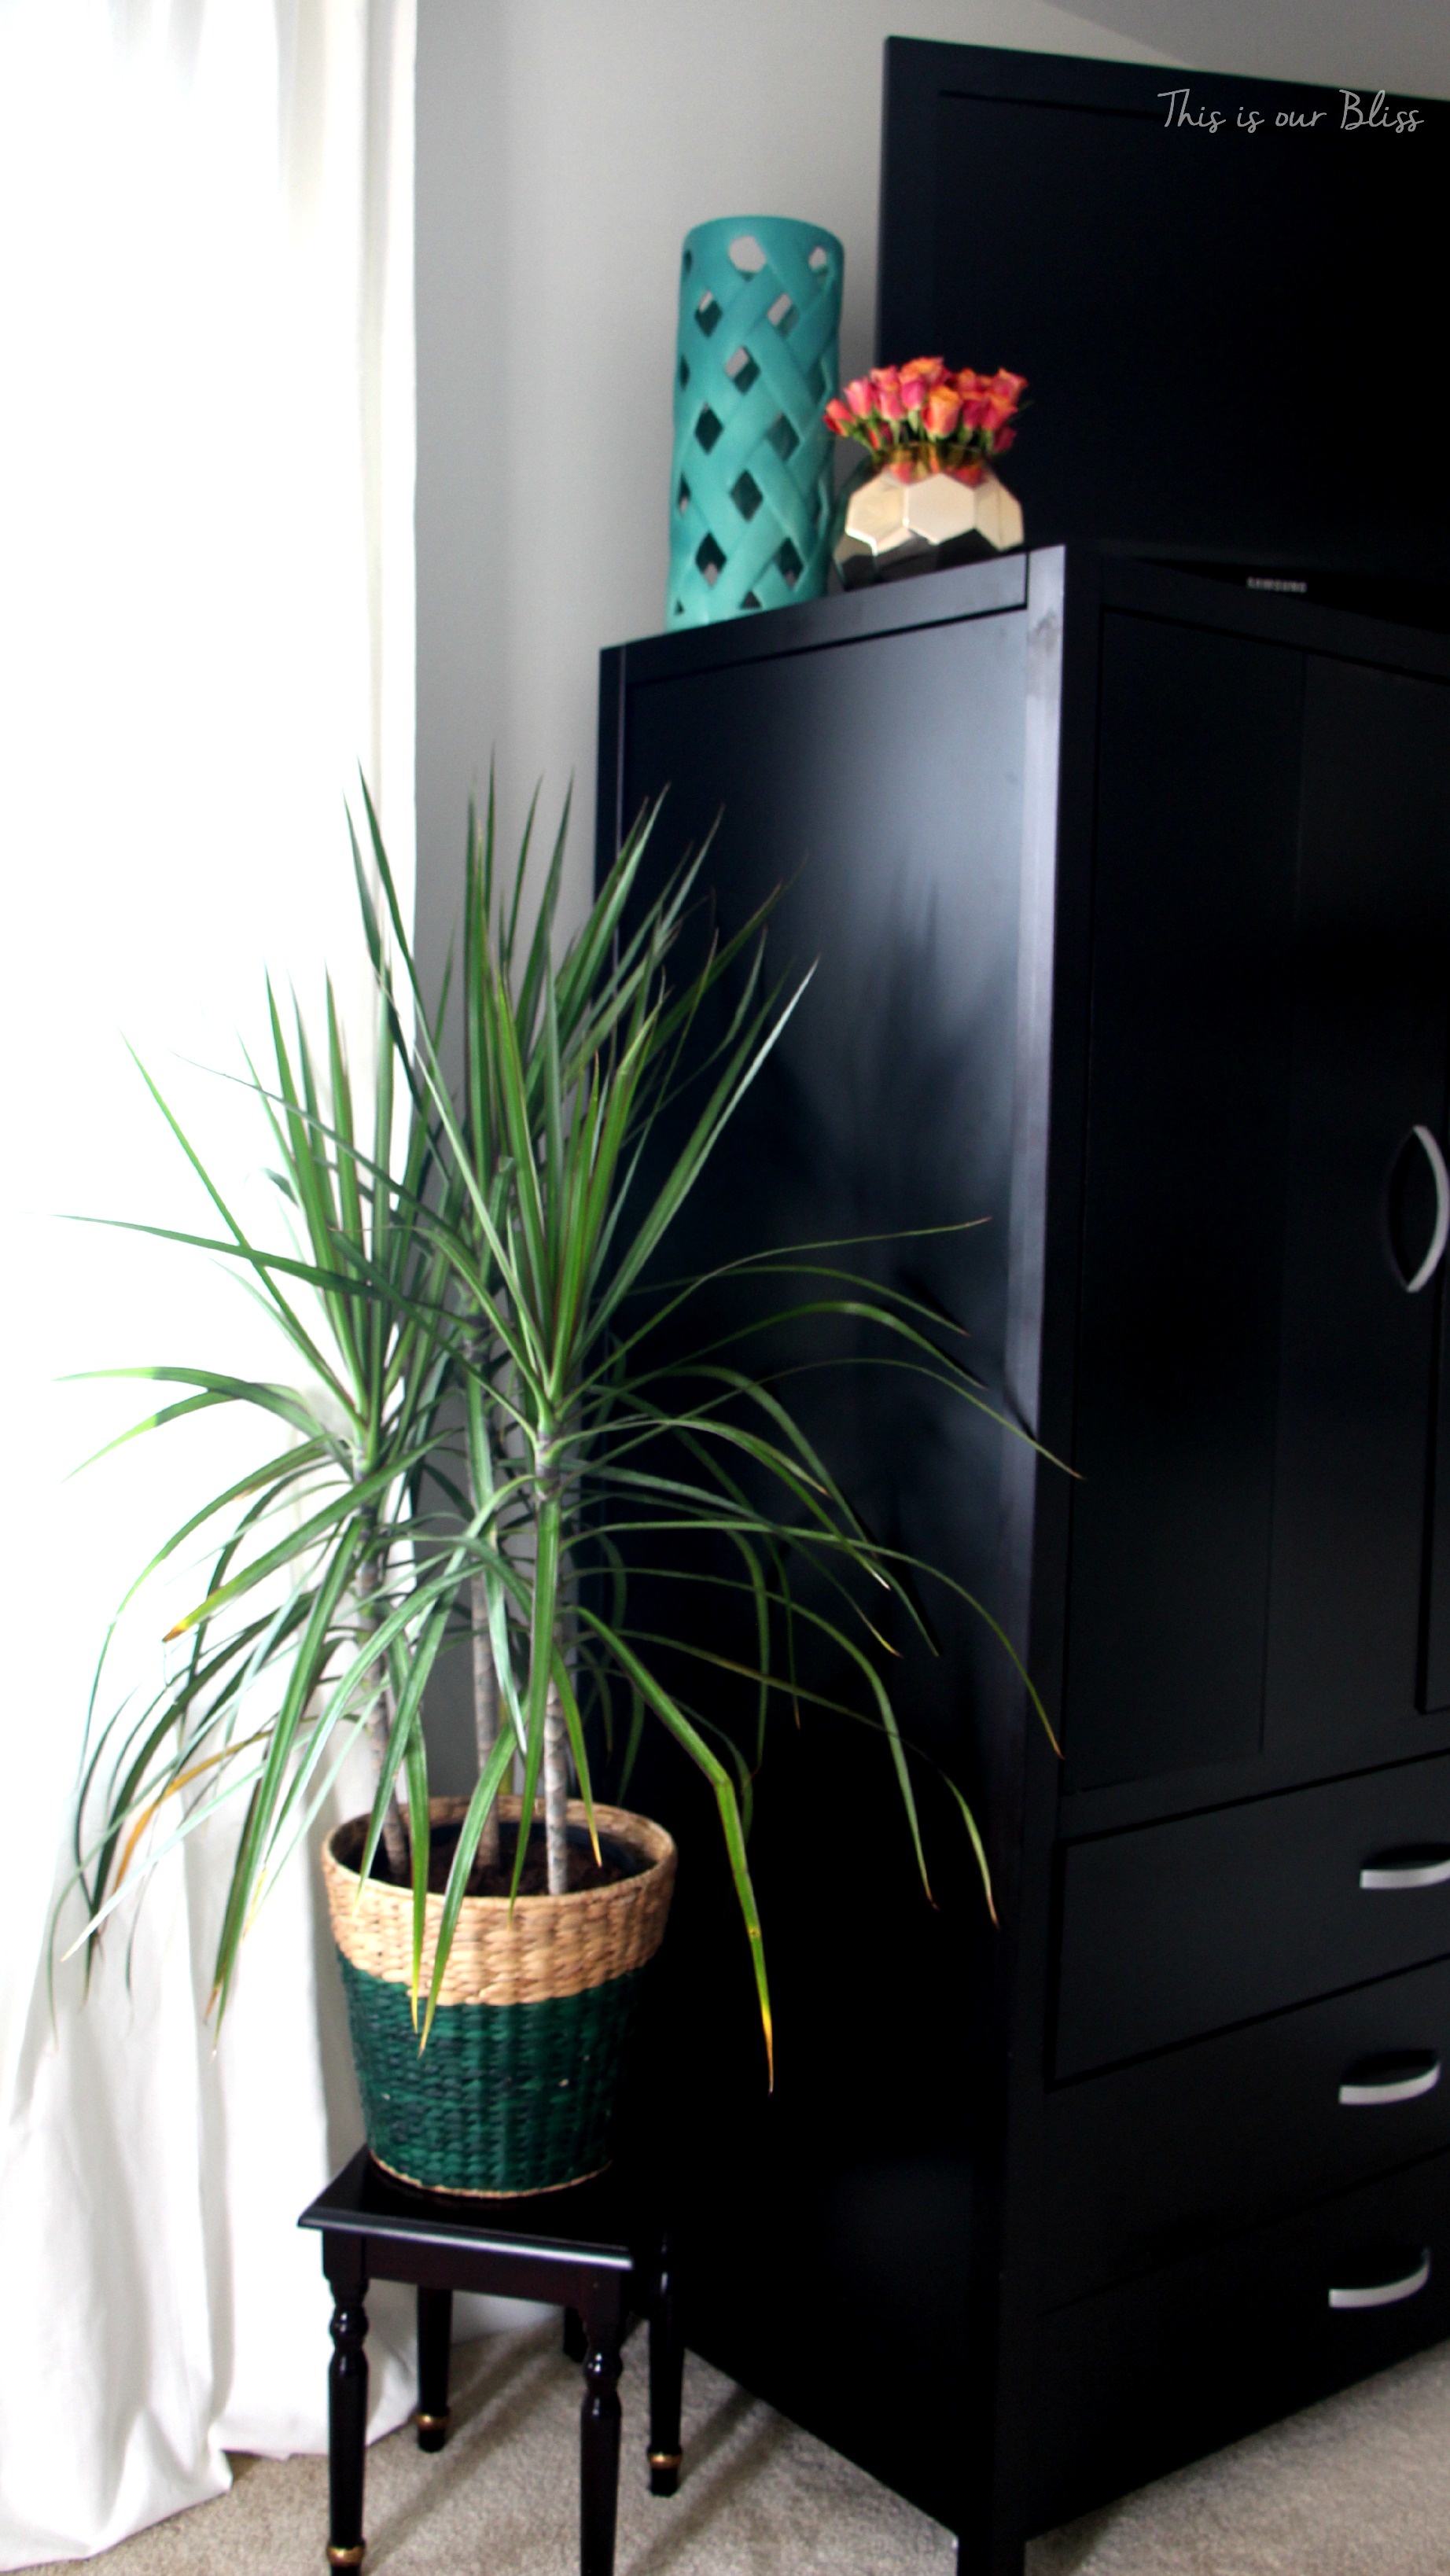 Guestroom revamp - planter - armoire - ombre lamp - This is our Bliss